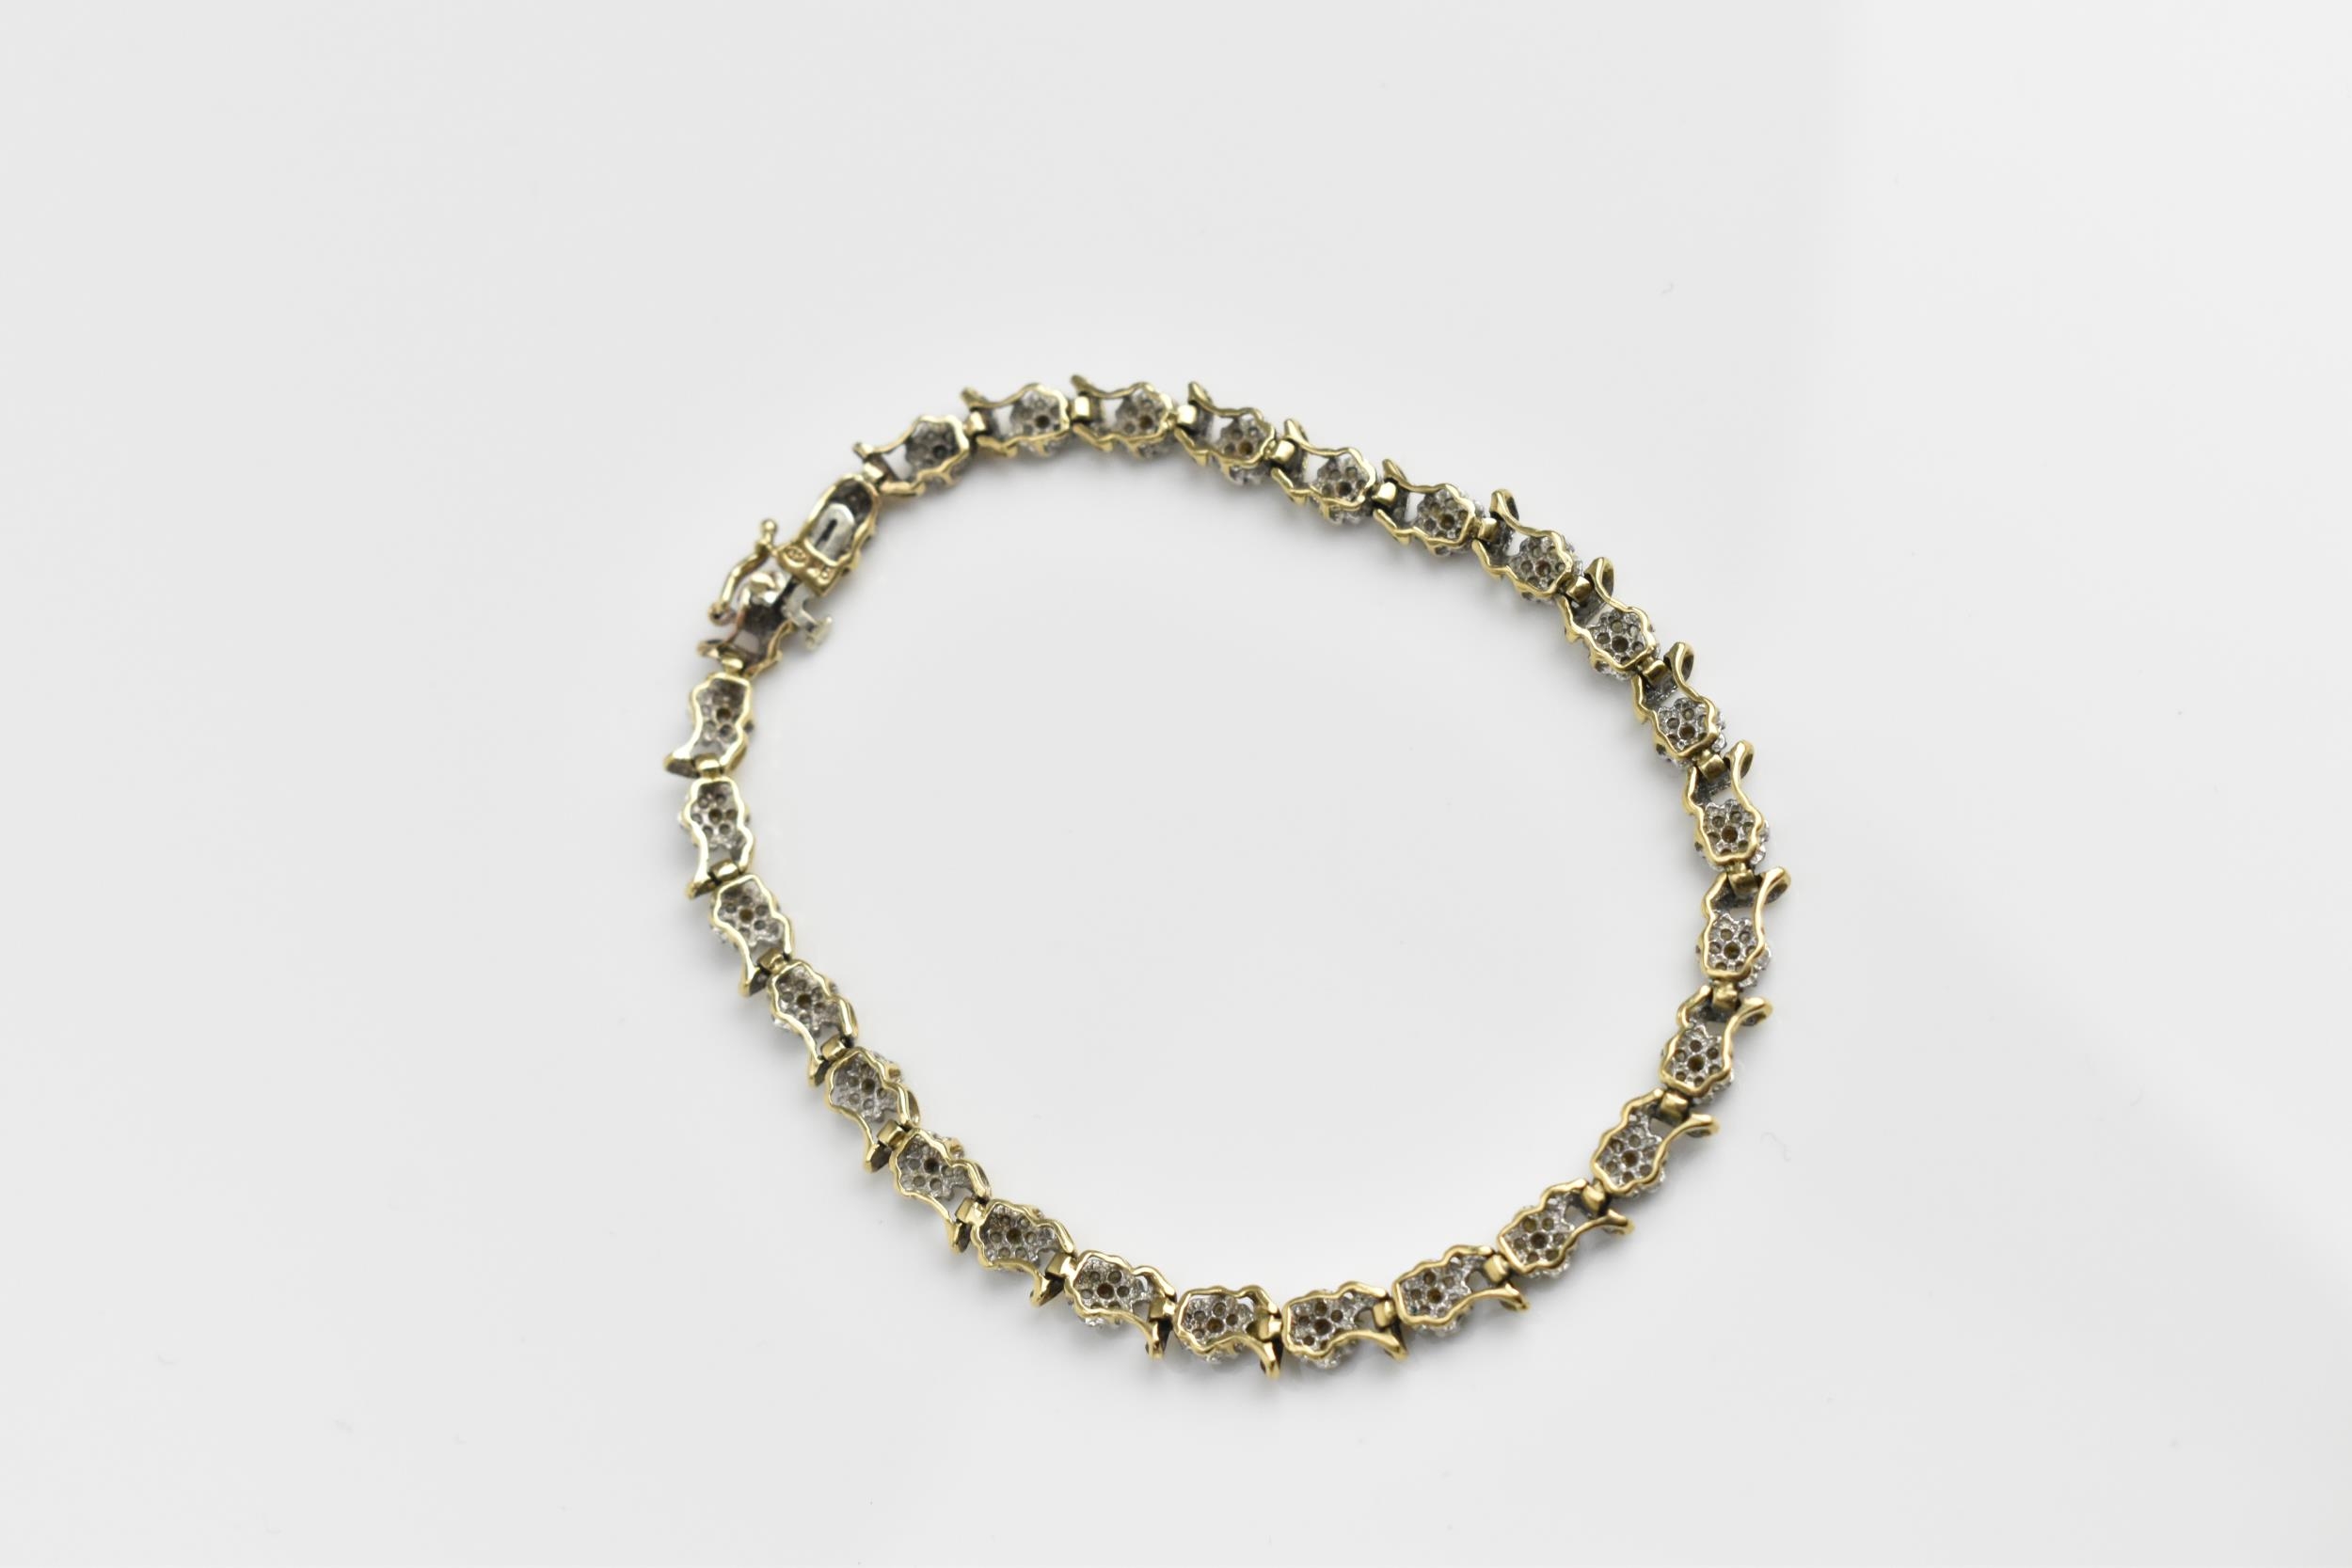 A 9ct yellow gold and diamond bracelet, designed with twenty-seven floral diamond clusters, with - Image 6 of 7